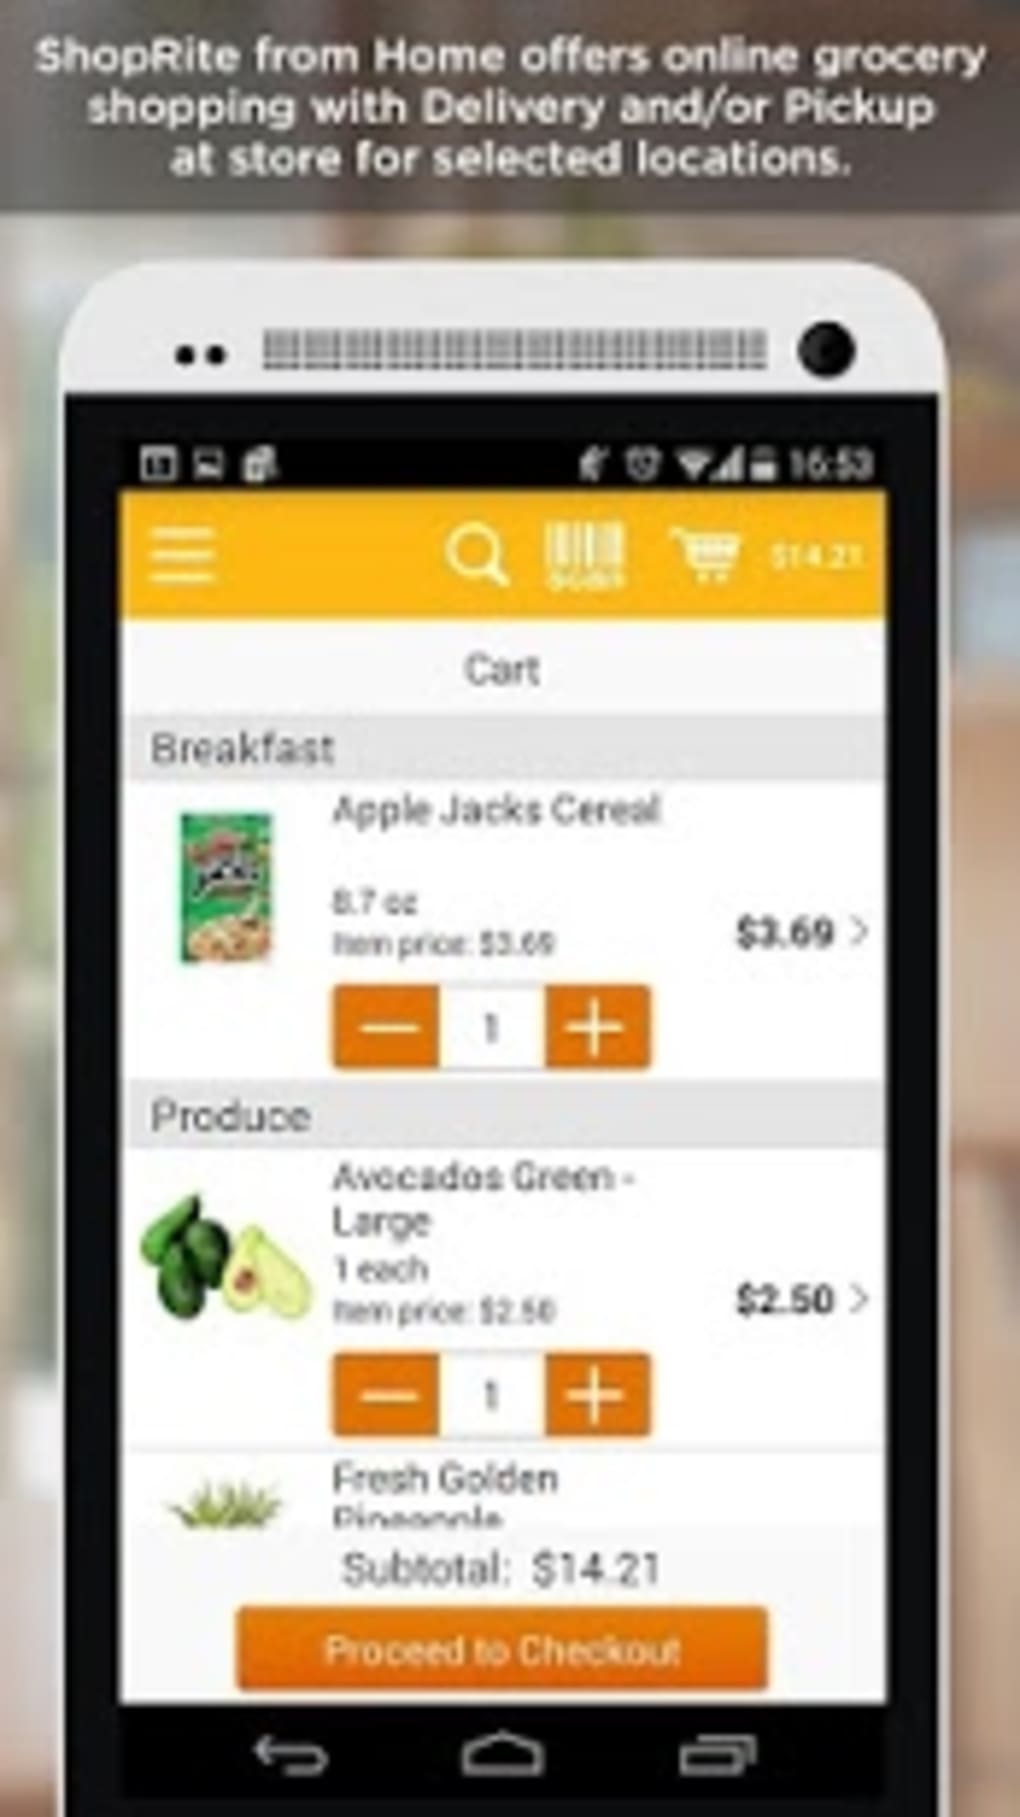 39 Best Images Digital Coupon App For Shoprite - Coupons | Research That Delivers Results